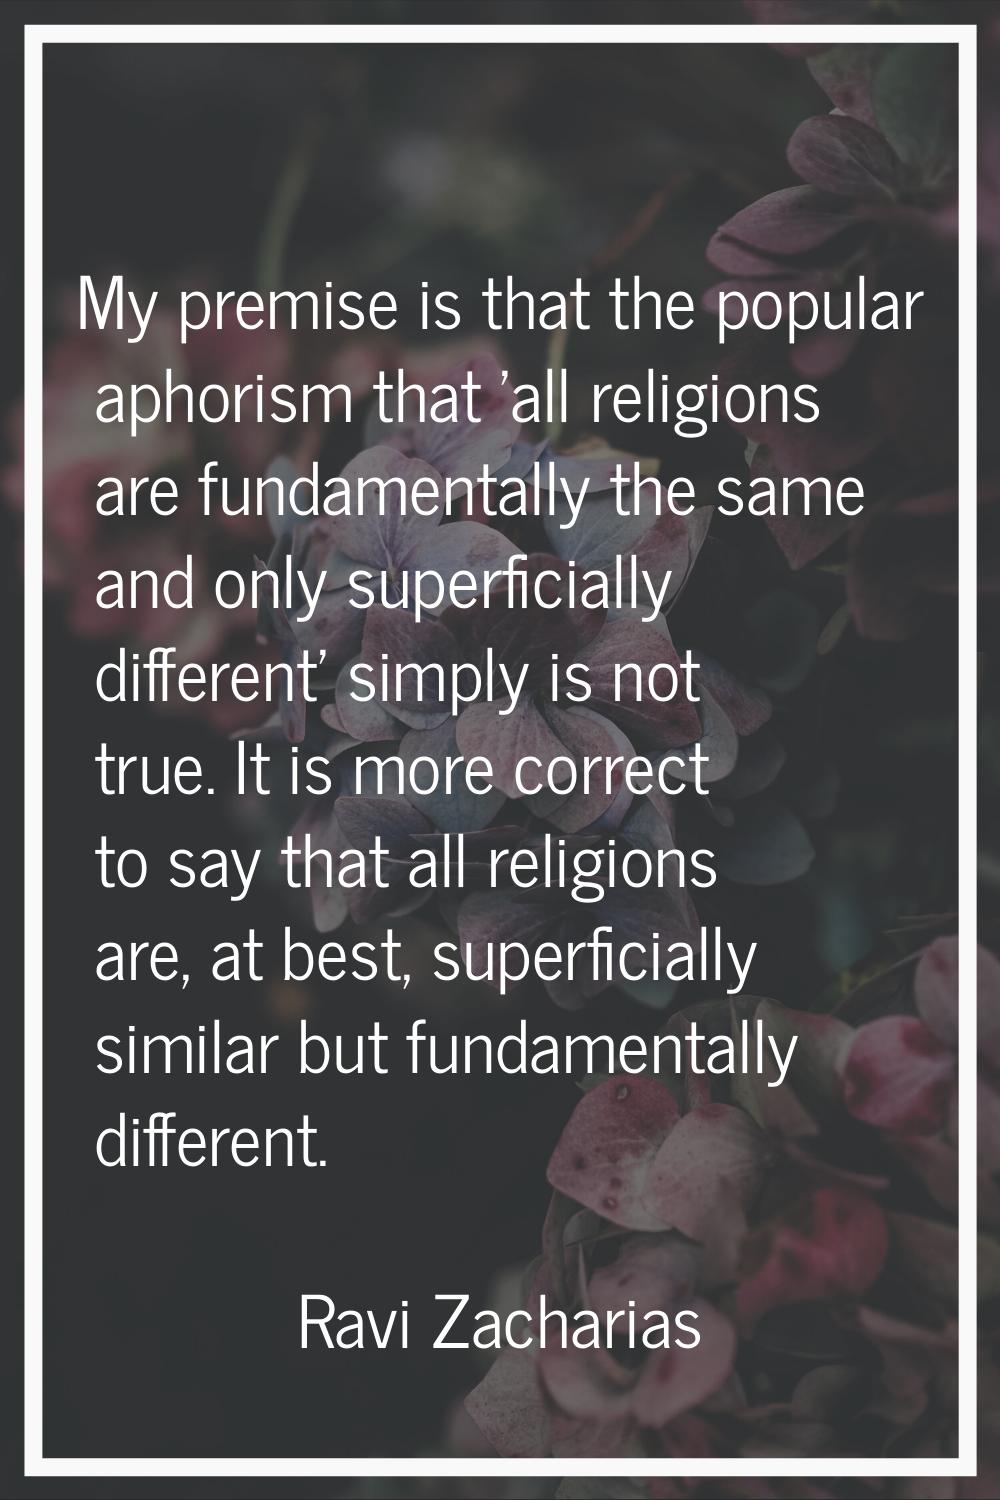 My premise is that the popular aphorism that 'all religions are fundamentally the same and only sup